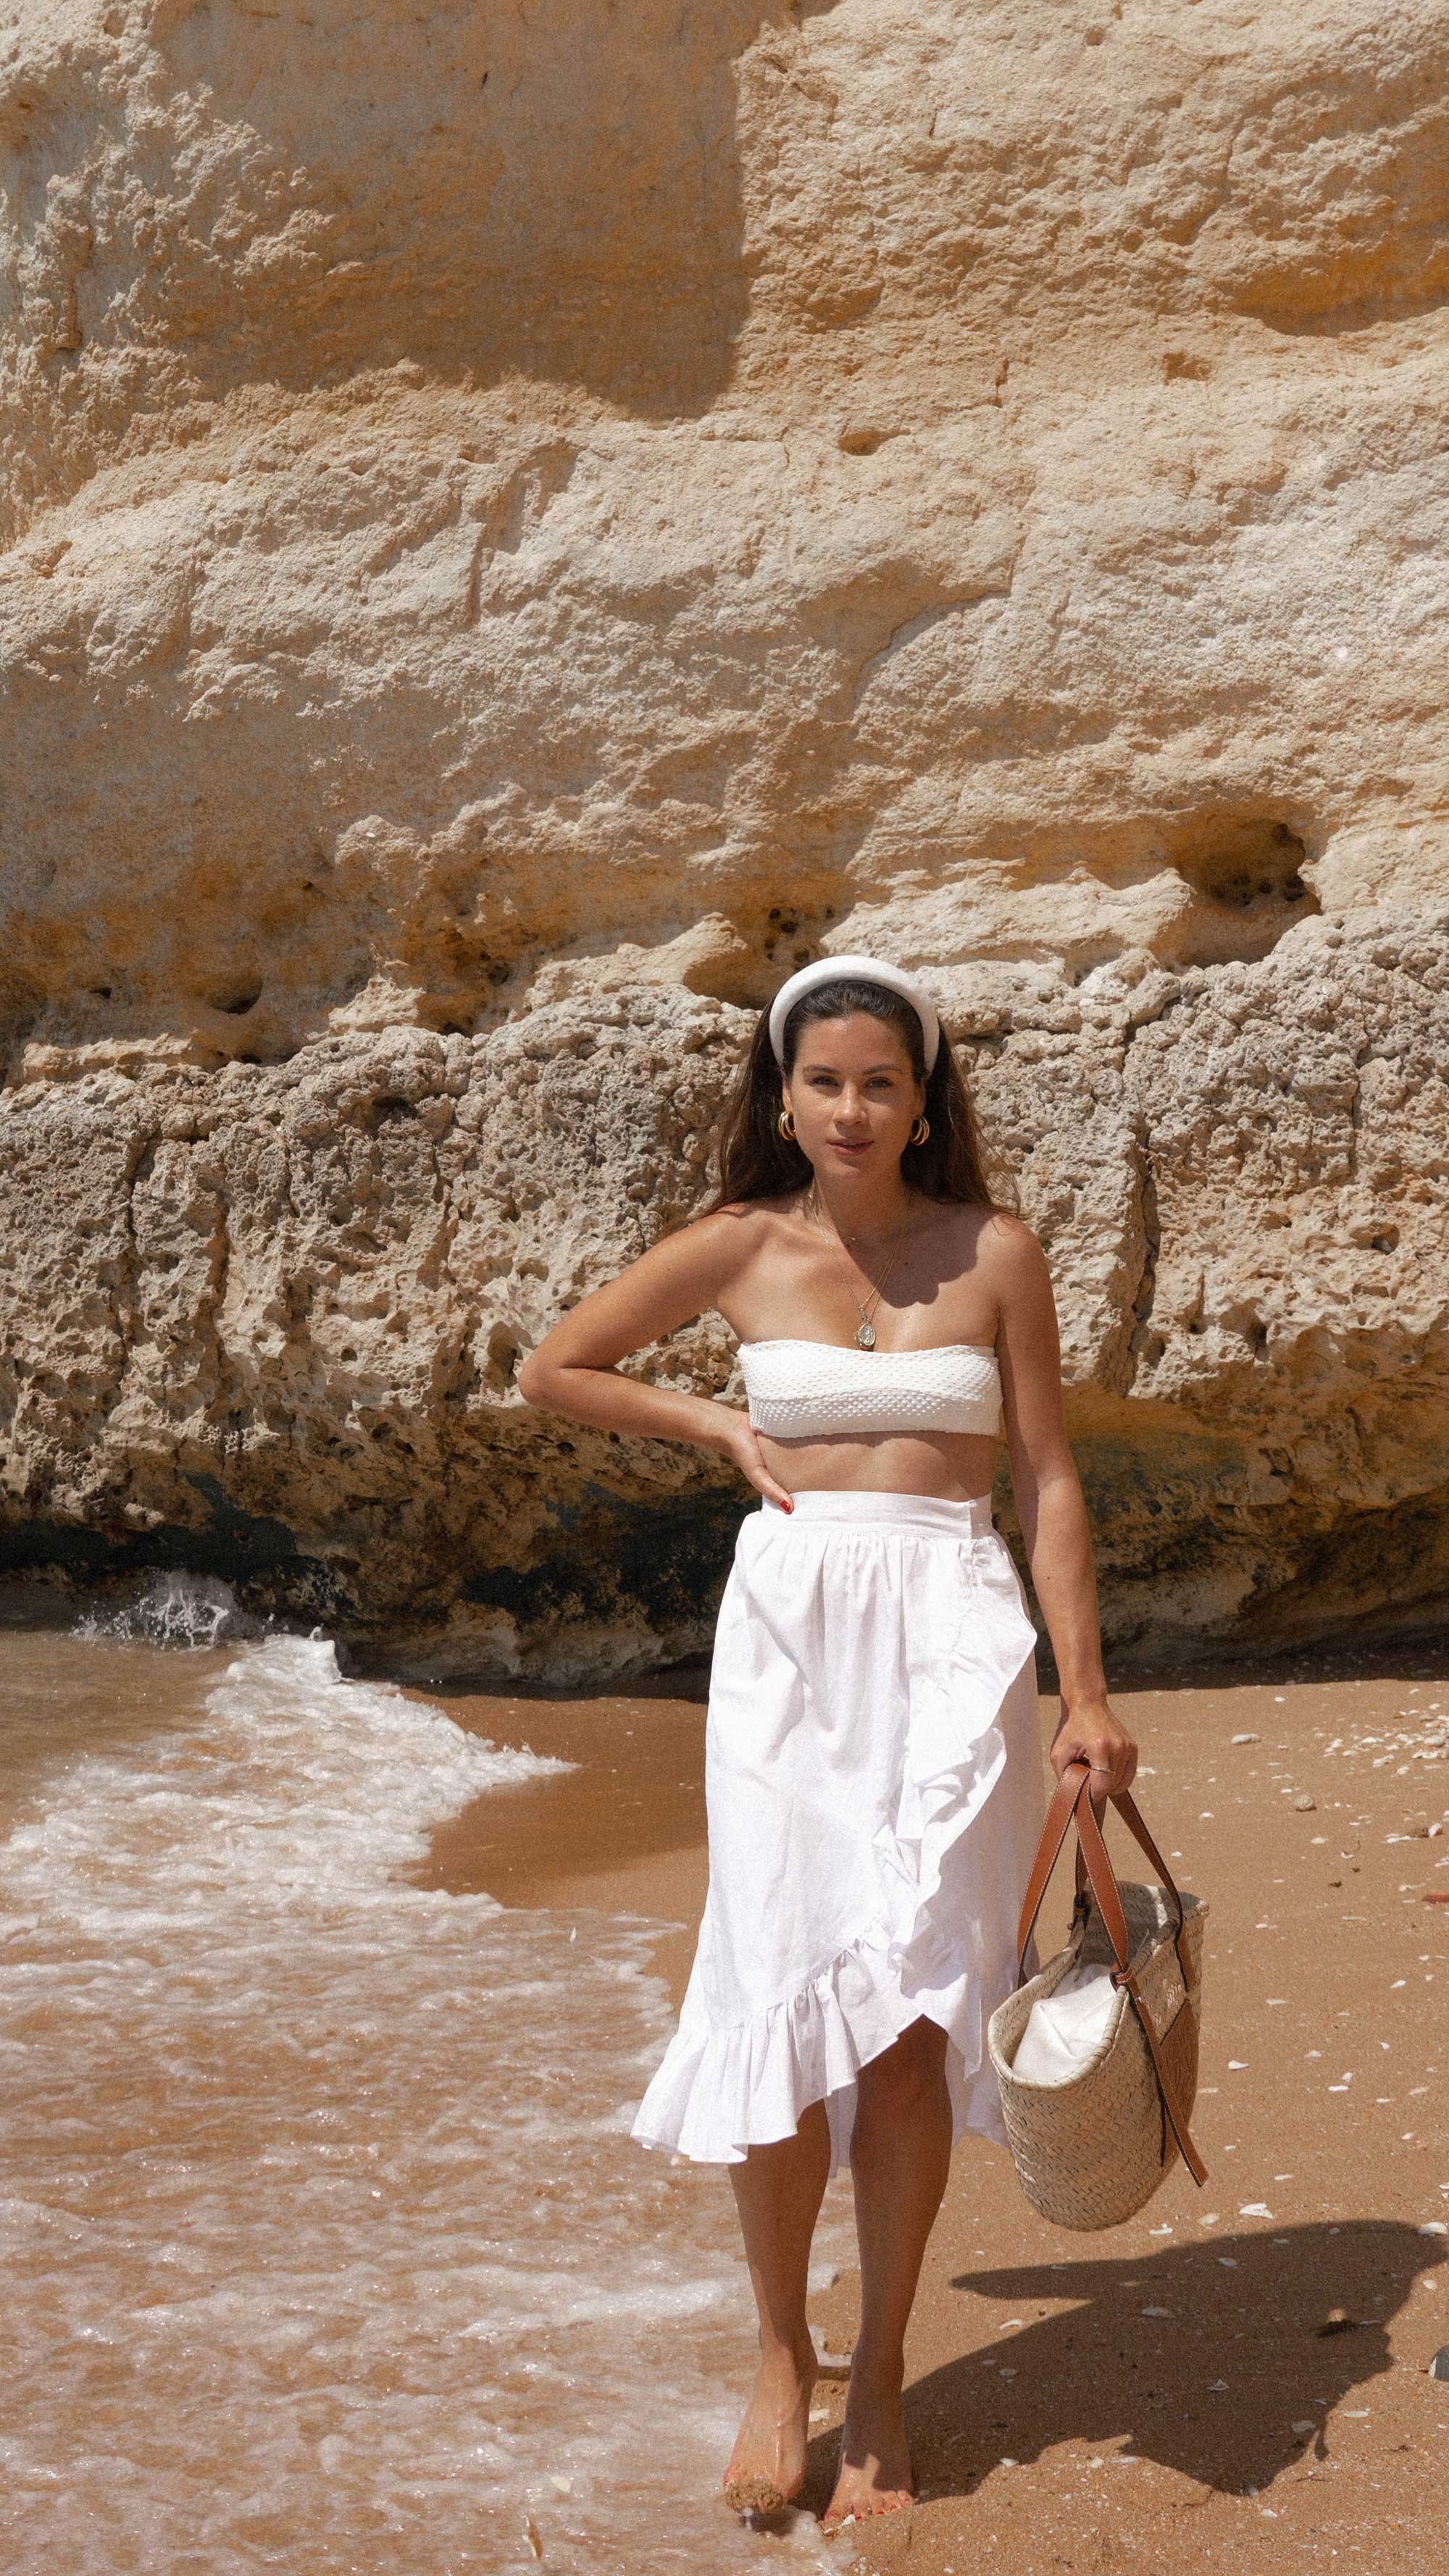 Summer Travel in Algarve, Portugal. Sarah Butler of @SarahChristine wearing cute summer beach outfit in sandy coves of Algarve, Portugal -7.jpg